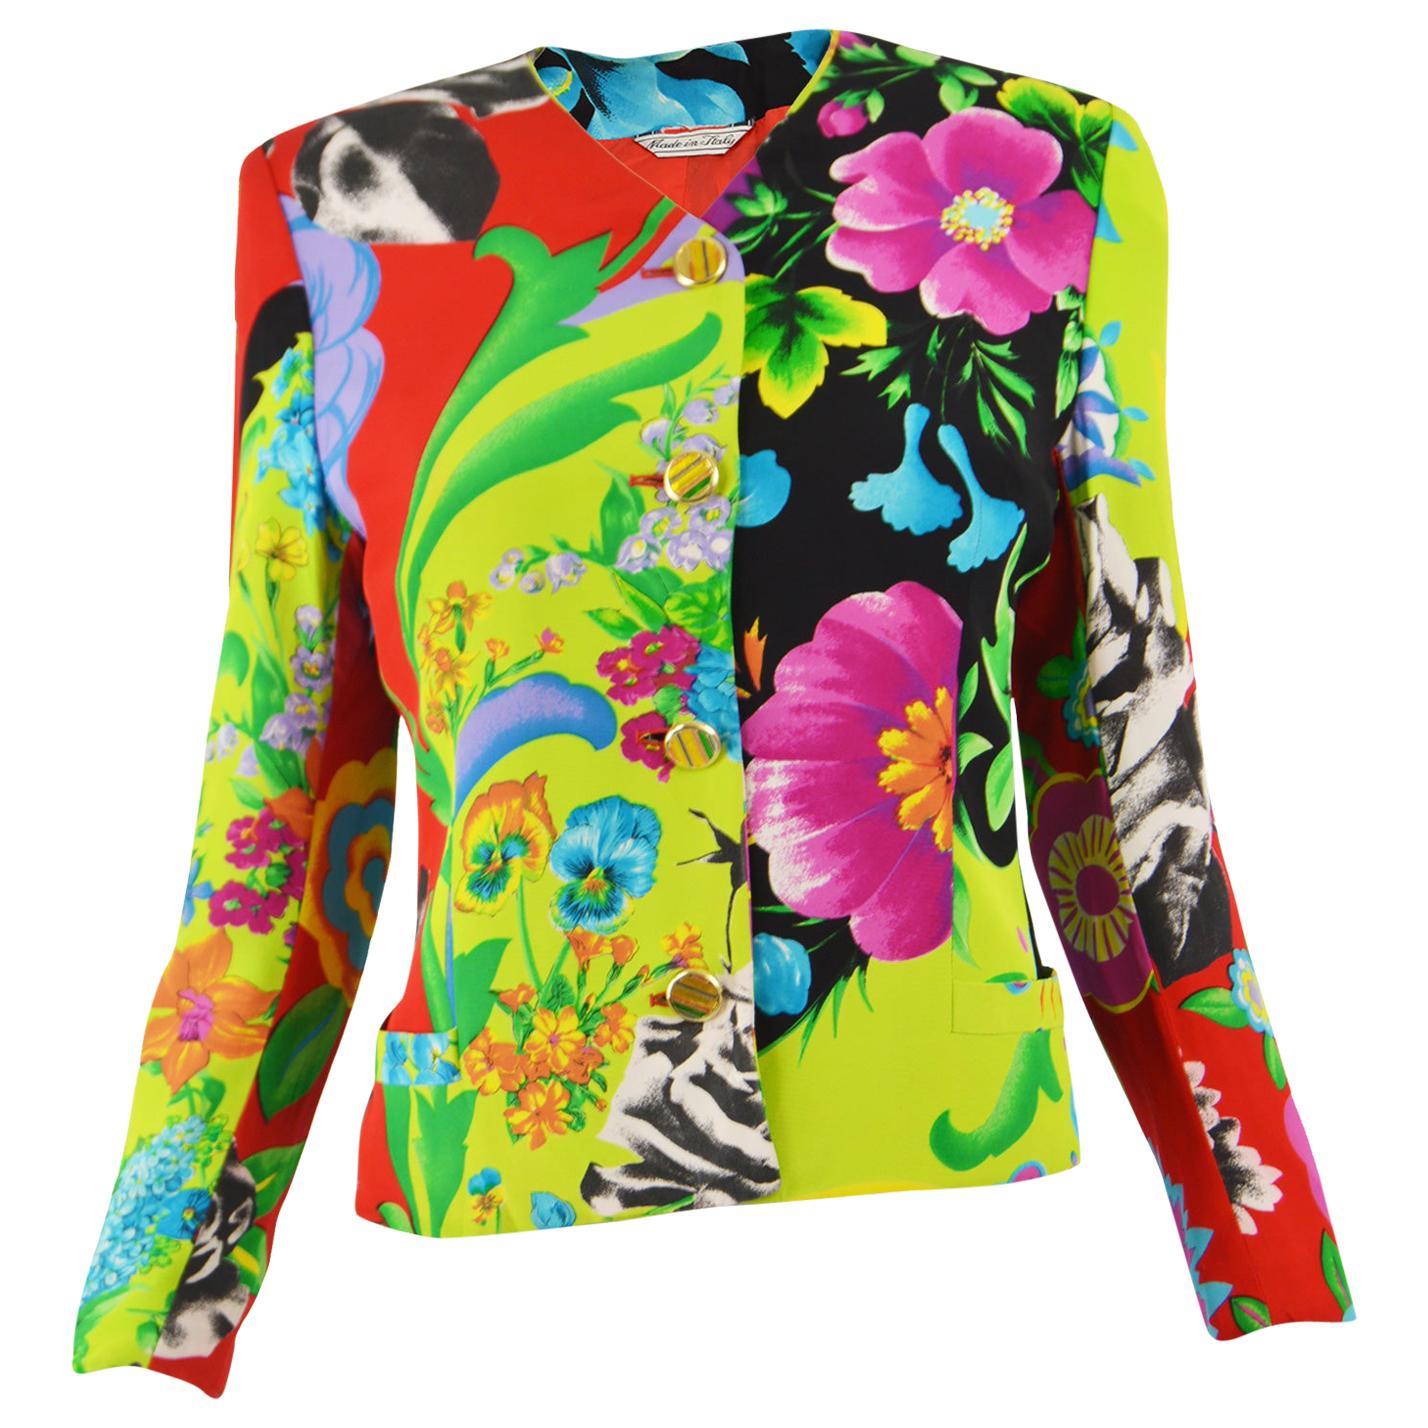 Istante by Gianni Versace Bright Tropical Print Women's Vintage Jacket, 1980s